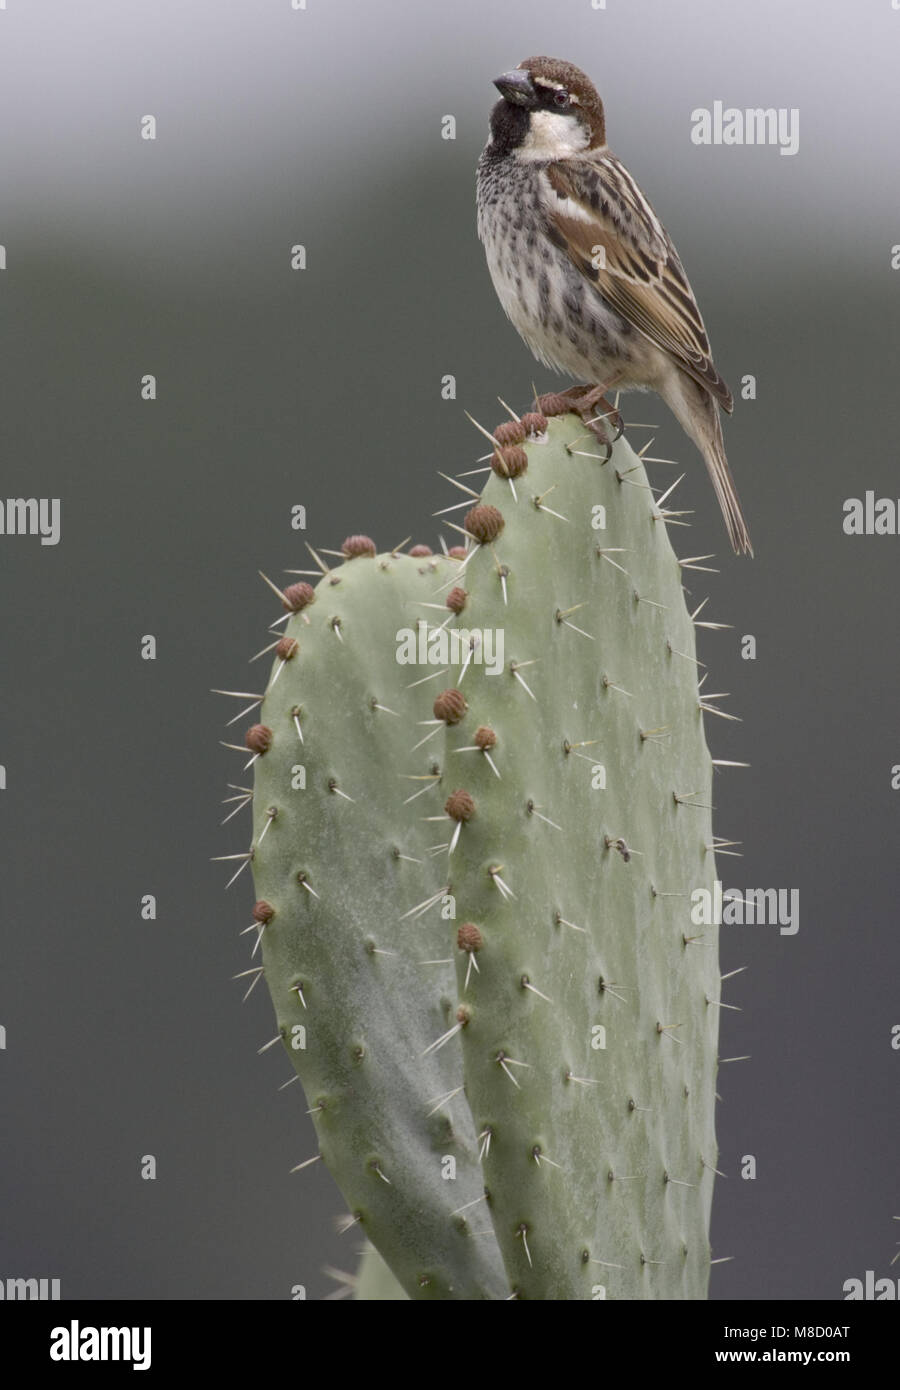 Spanish Sparrow male perched on cactus Morocco, Spaanse Mus mannetje zittend op cactus Marokko Stock Photo